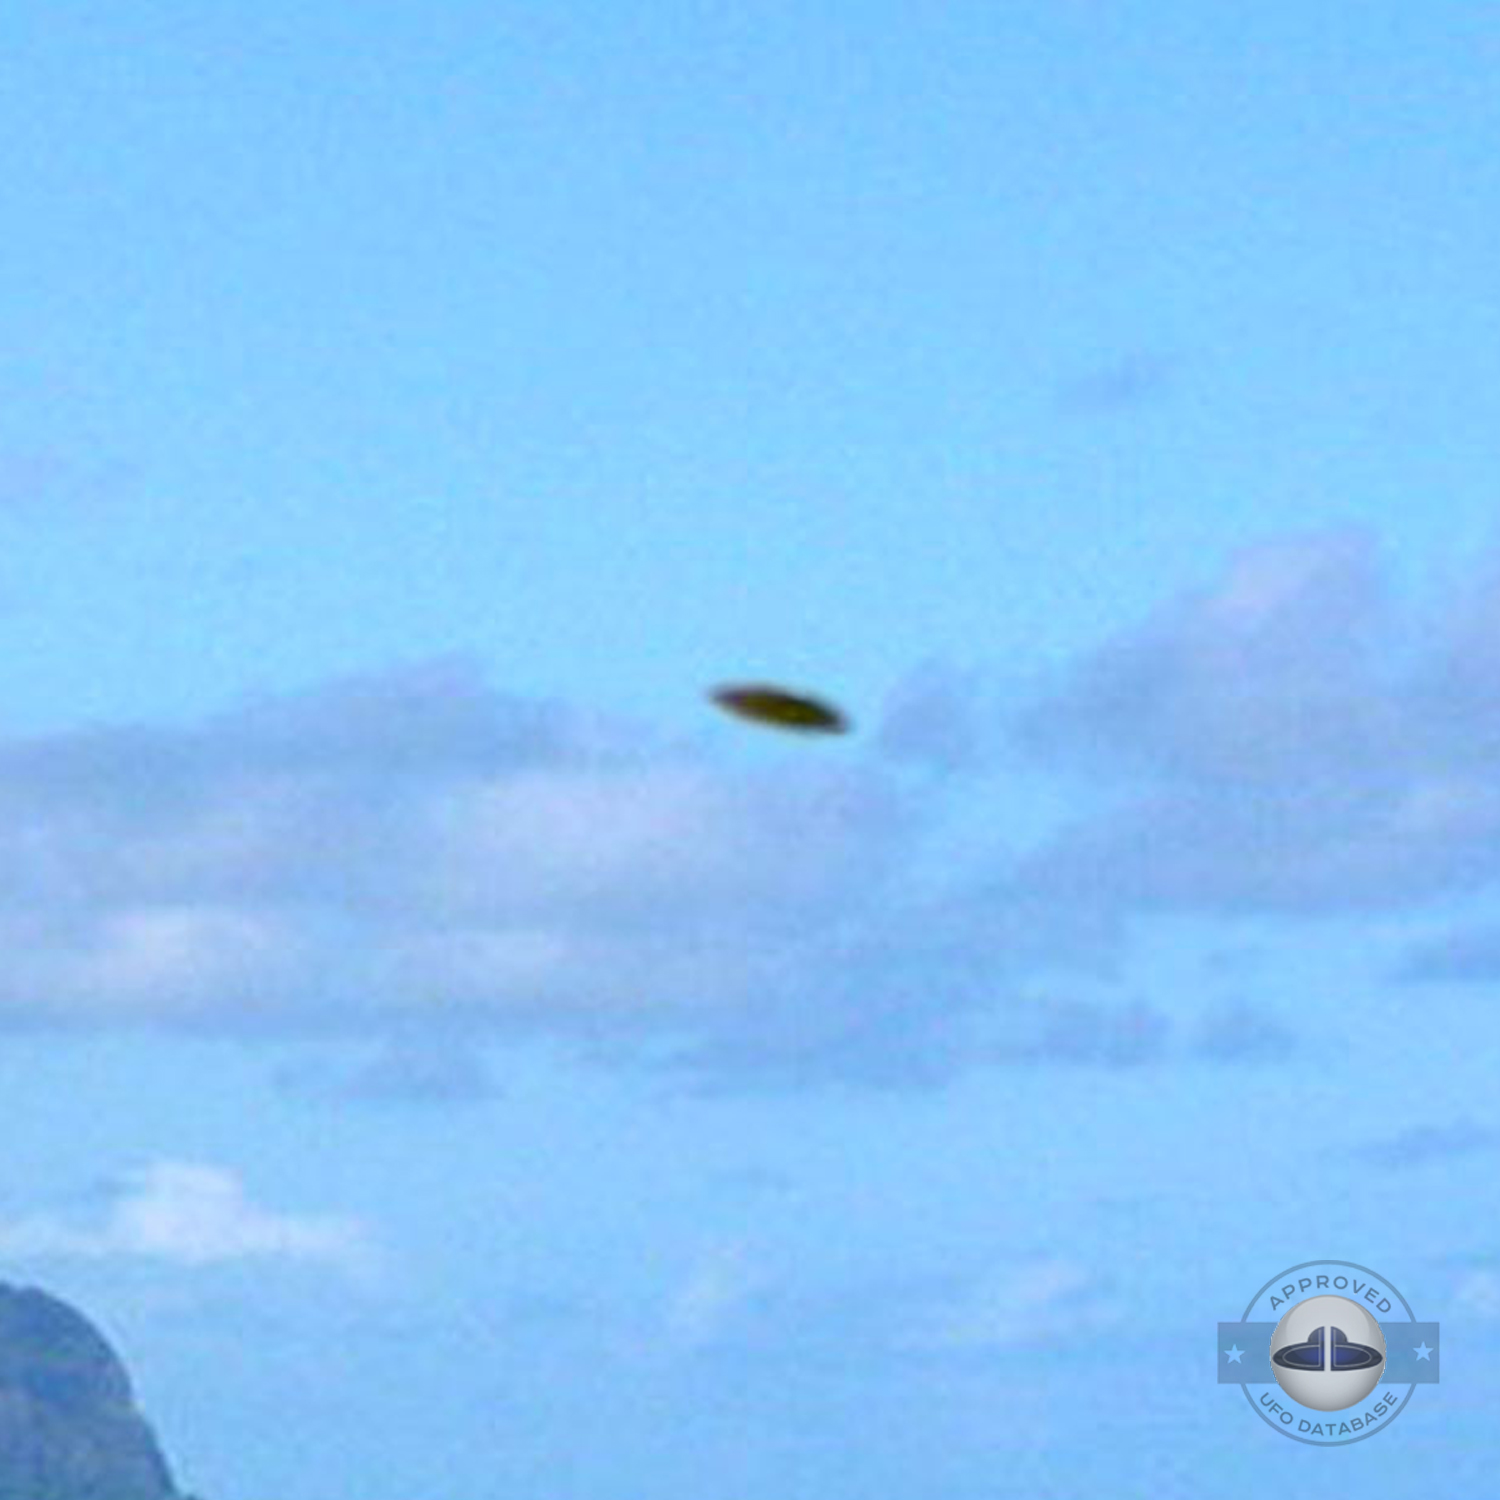 UFO picture taken on october 21, 2004 over the Kaneohe Bay in Hawaii UFO Picture #13-3